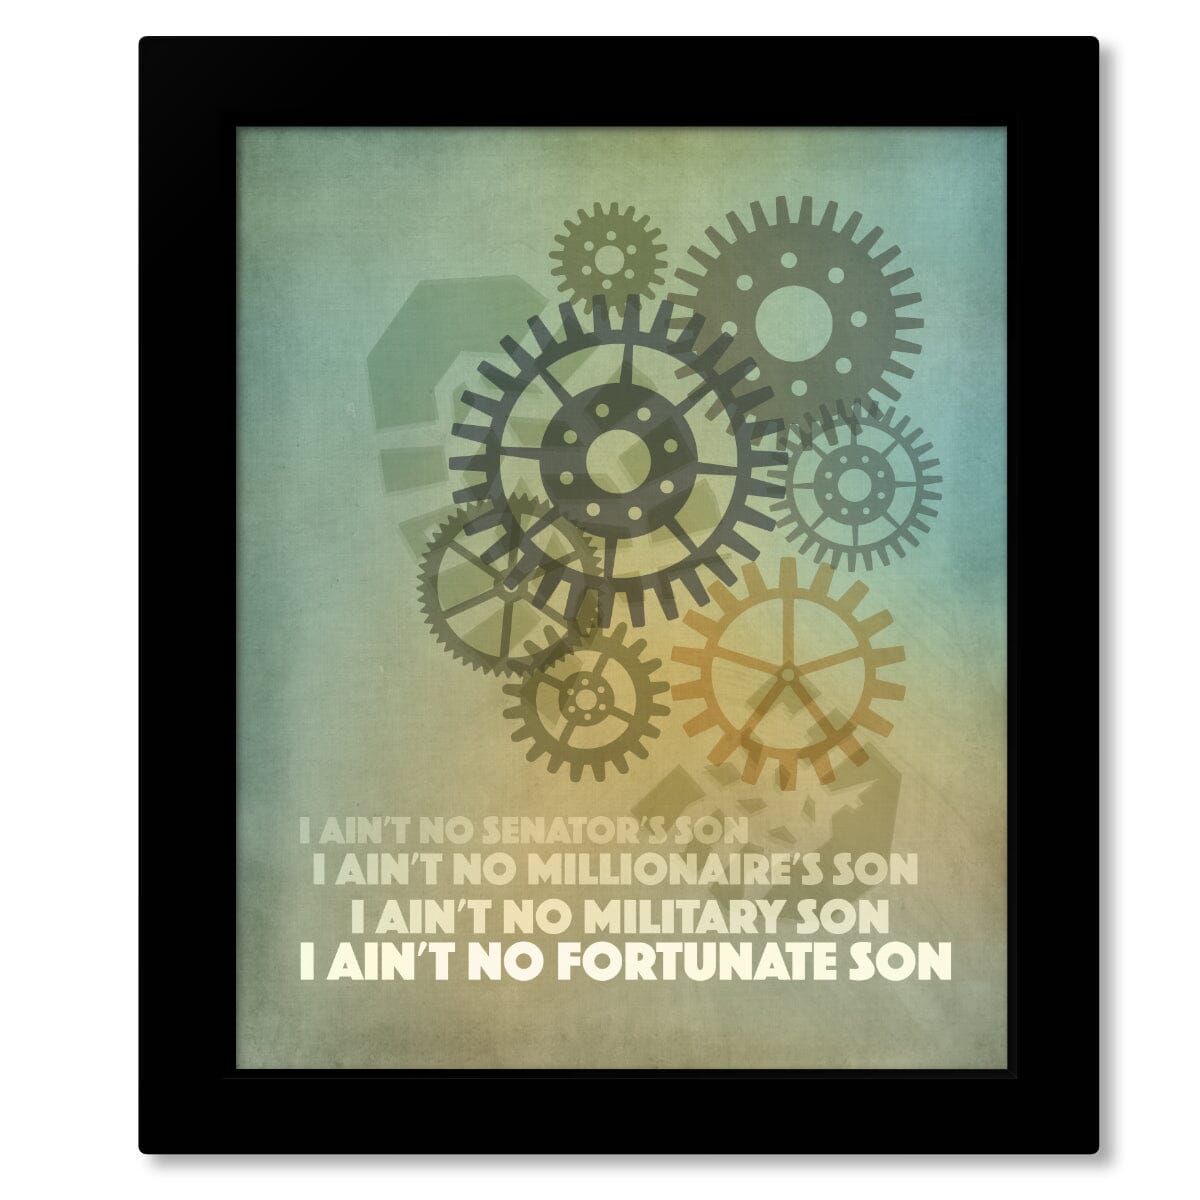 Fortunate Son by Creedence Clearwater Revival - Lyric Art Song Lyrics Art Song Lyrics Art 8x10 Framed Print (without mat) 